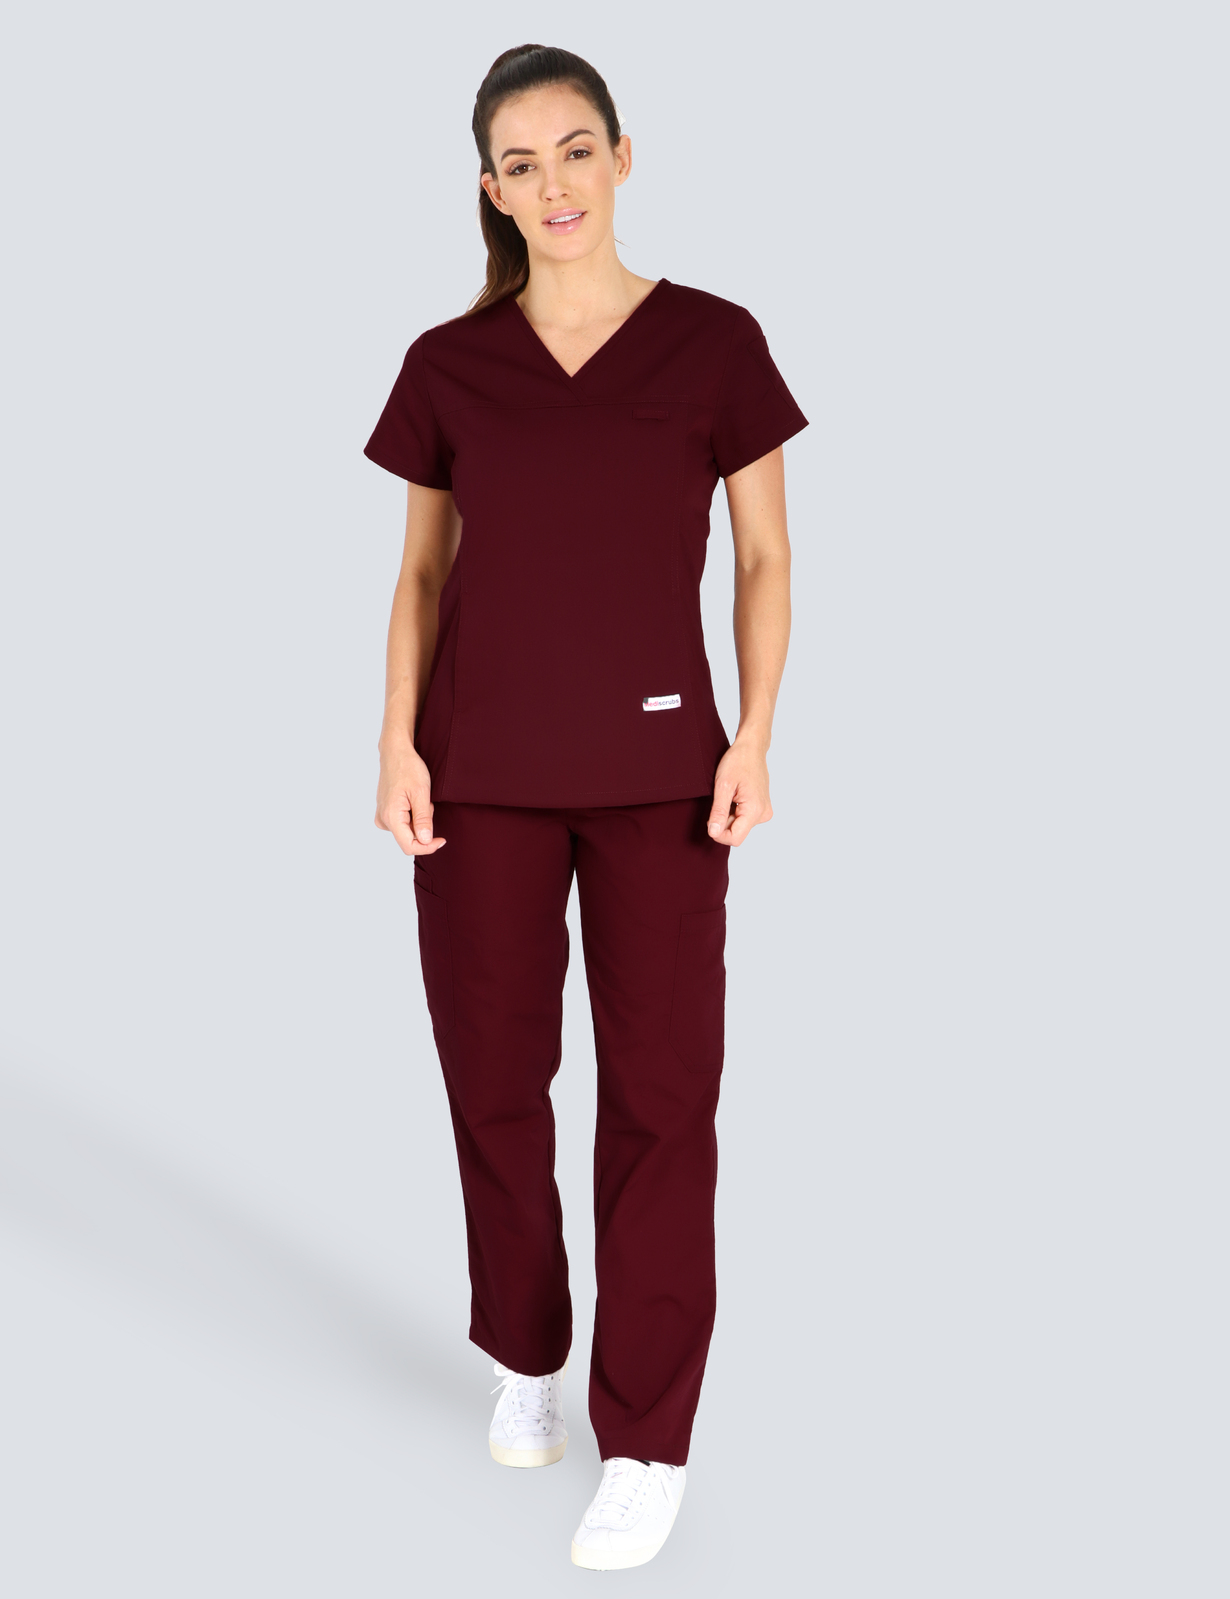 Redcliffe Hospital - ED CN (Women's Fit Solid Scrub Top and Cargo Pants in Burgundy incl Logos)